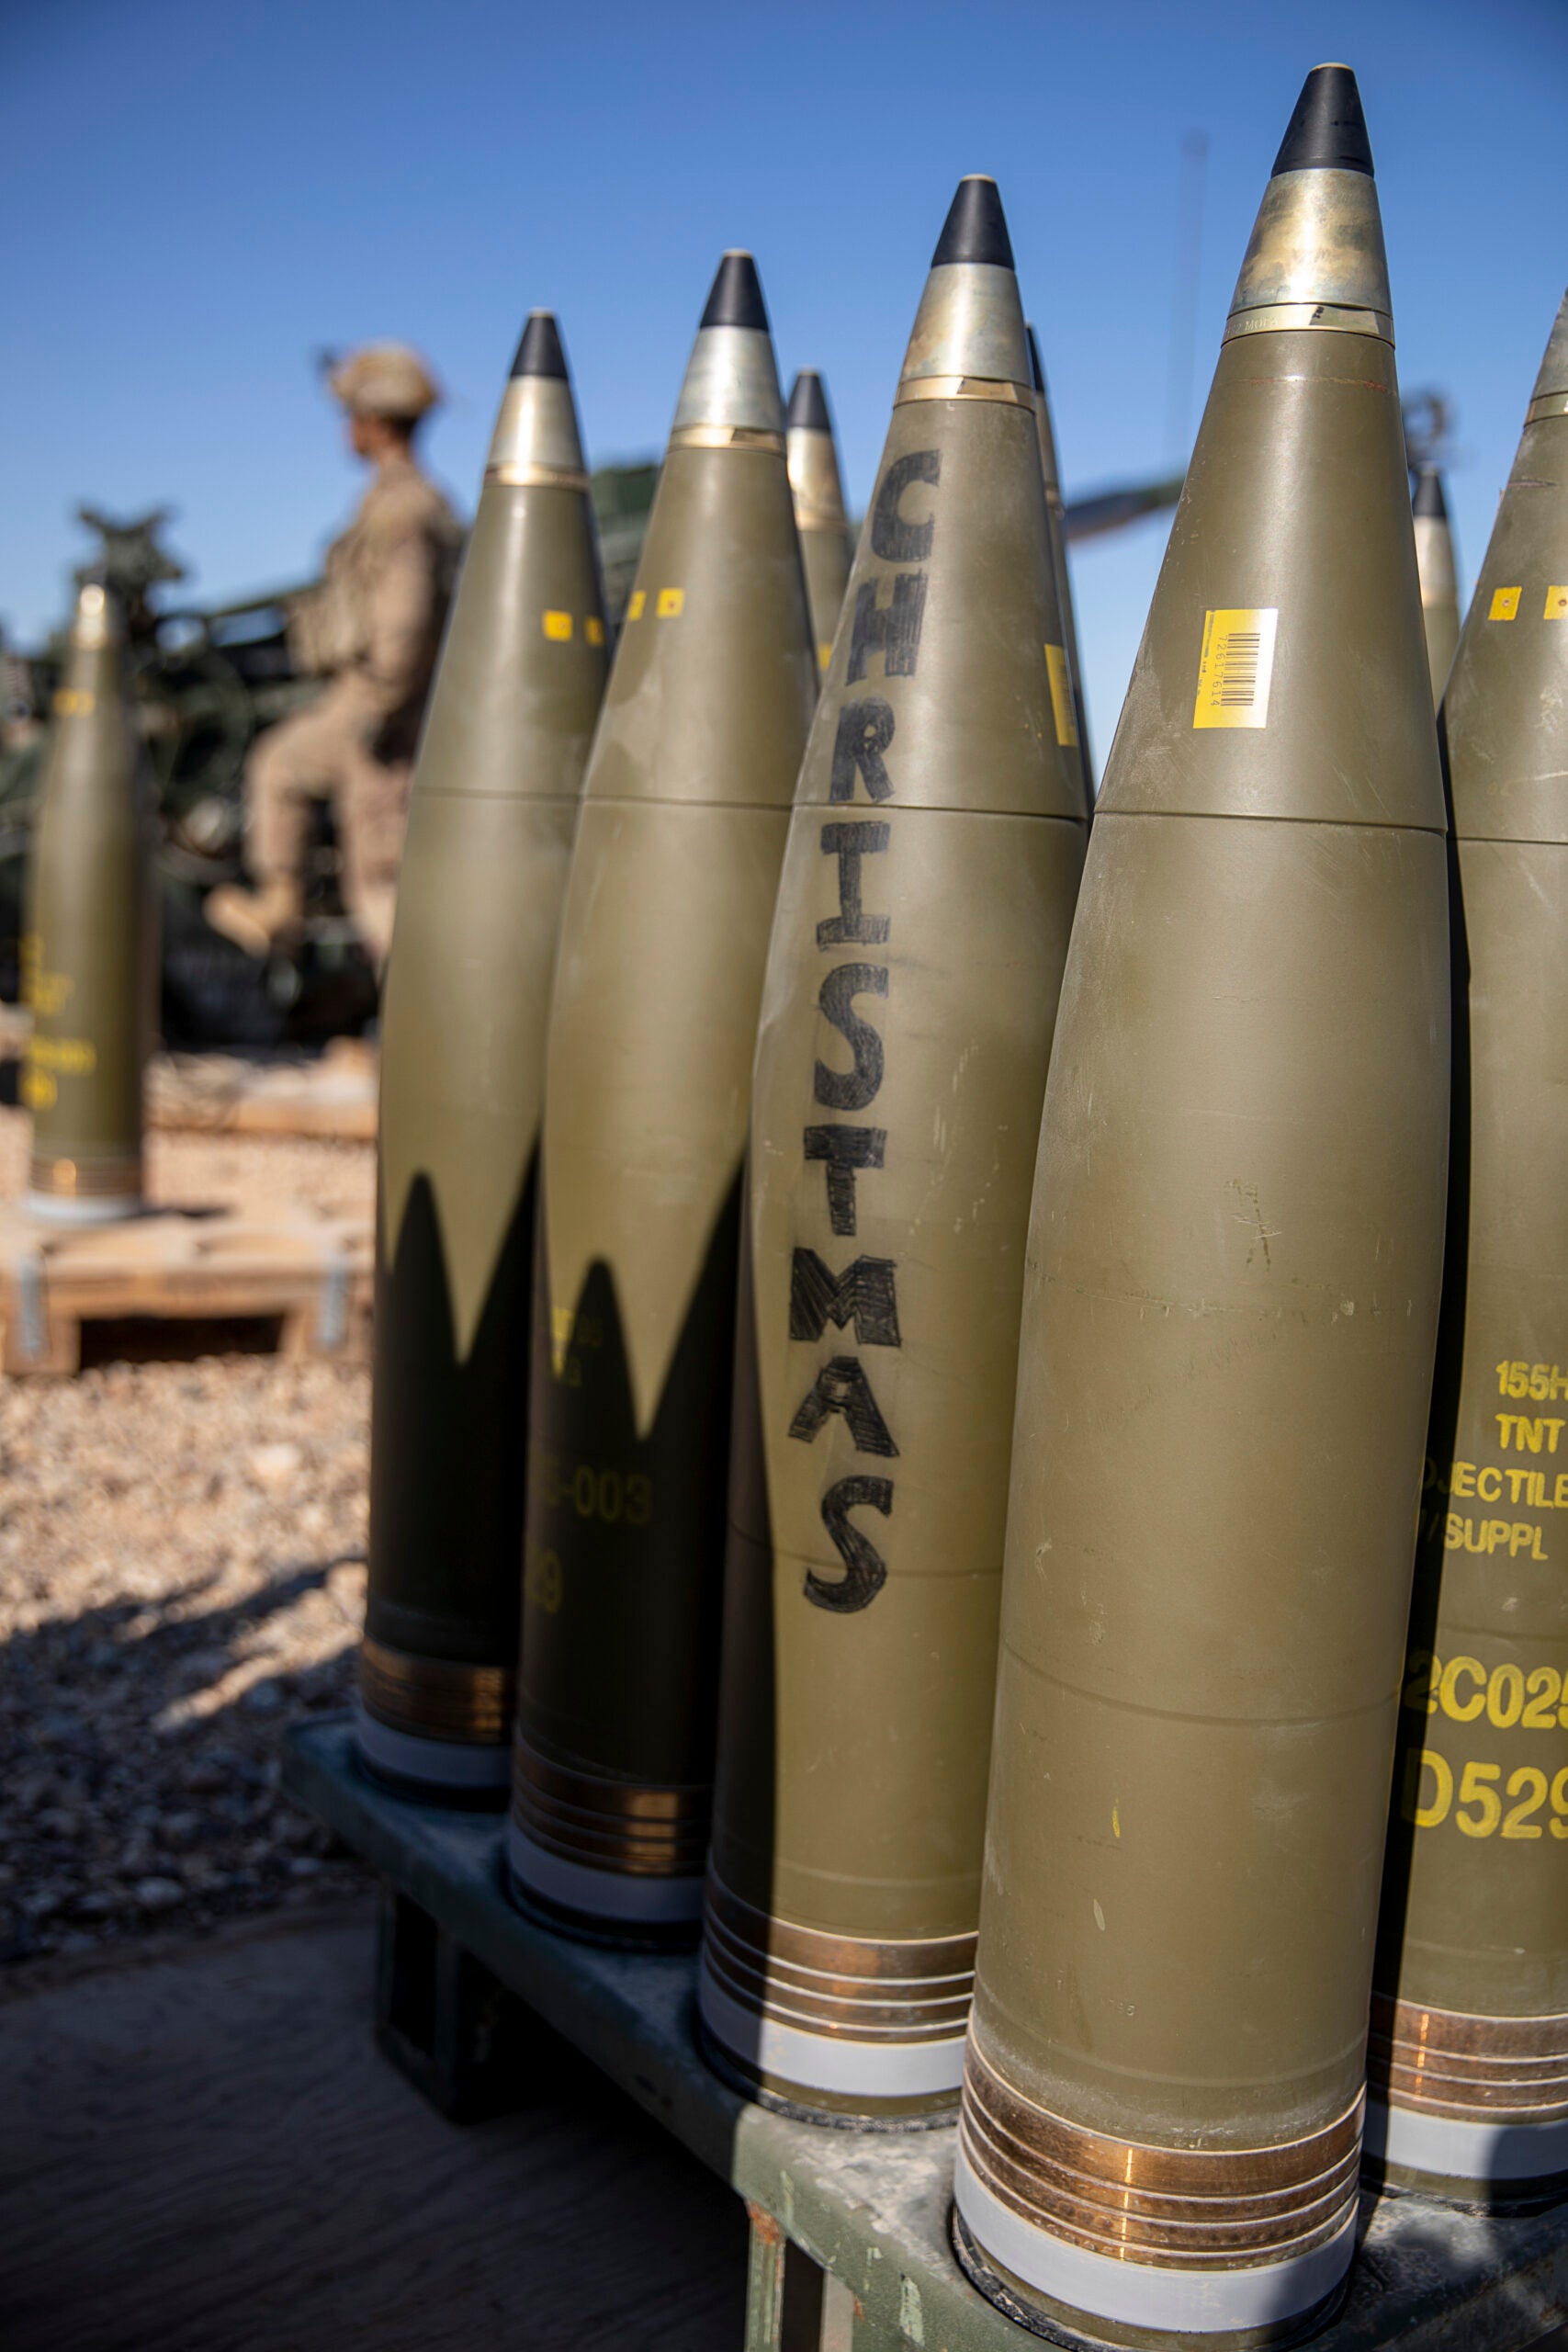 Multiple 155mm rounds are displayed during an M777 towed 155mm howitzer live-fire exercise at Al Asad Air Base, Iraq, March 2, 2020. These drills enhance base defense operations to provide better security for U.S. forces in Iraq. Combined Joint Task Force-Operation Inherent Resolve and its partners remain united to prevent the resurgence of Daesh and its violent extremist ideology. (U.S. Army photo by Spc. Derek Mustard)